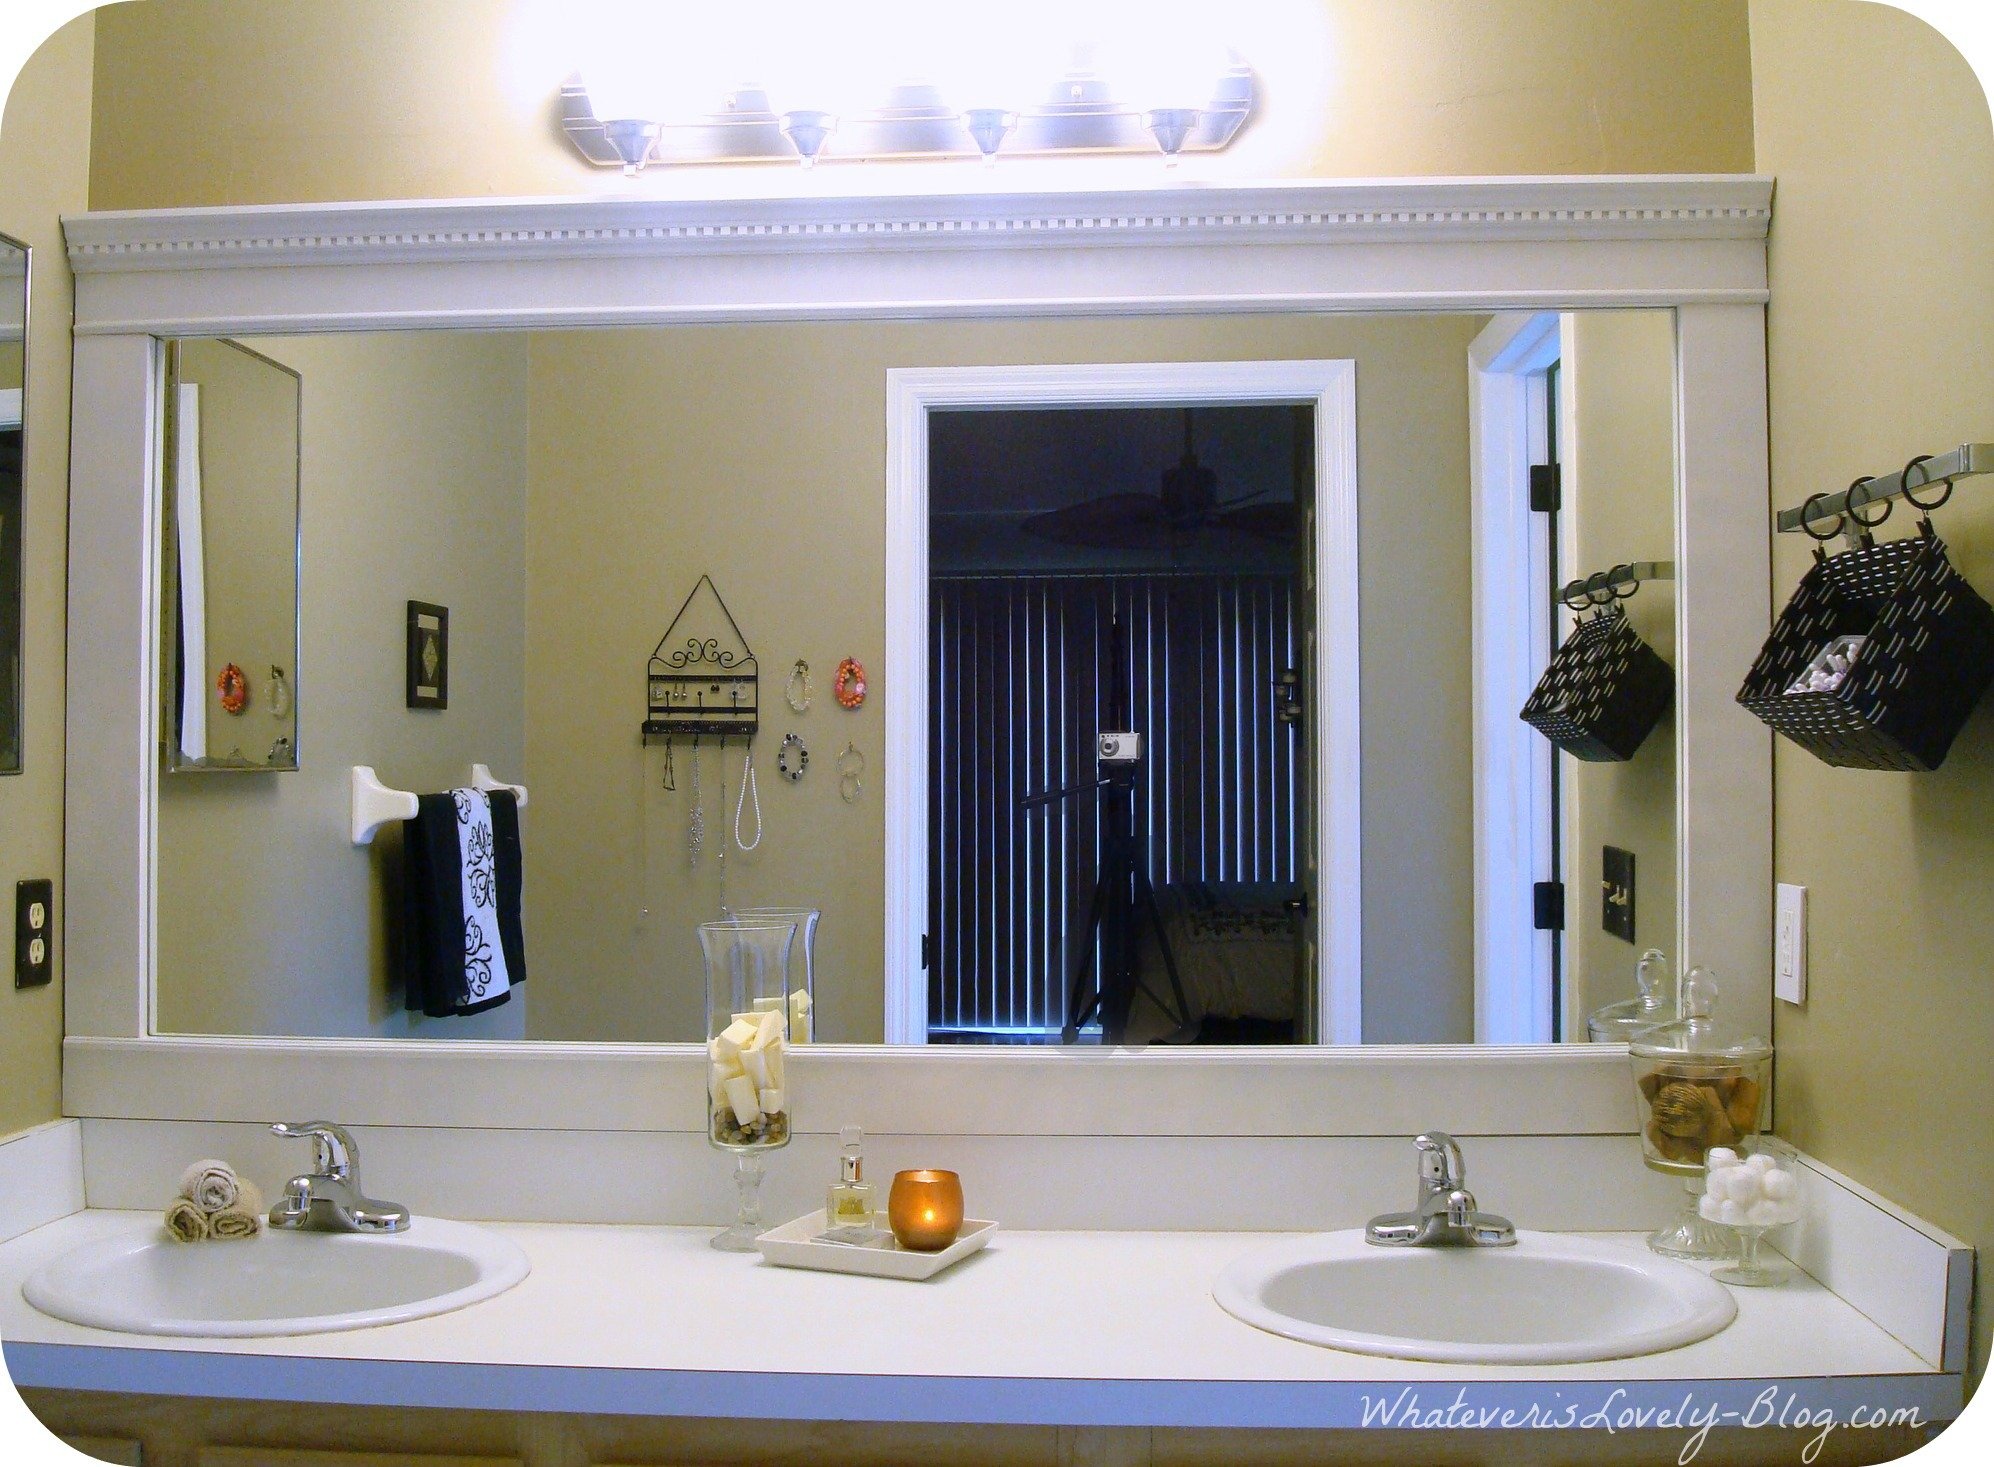 5 Tips to Create a Bathroom That Sells